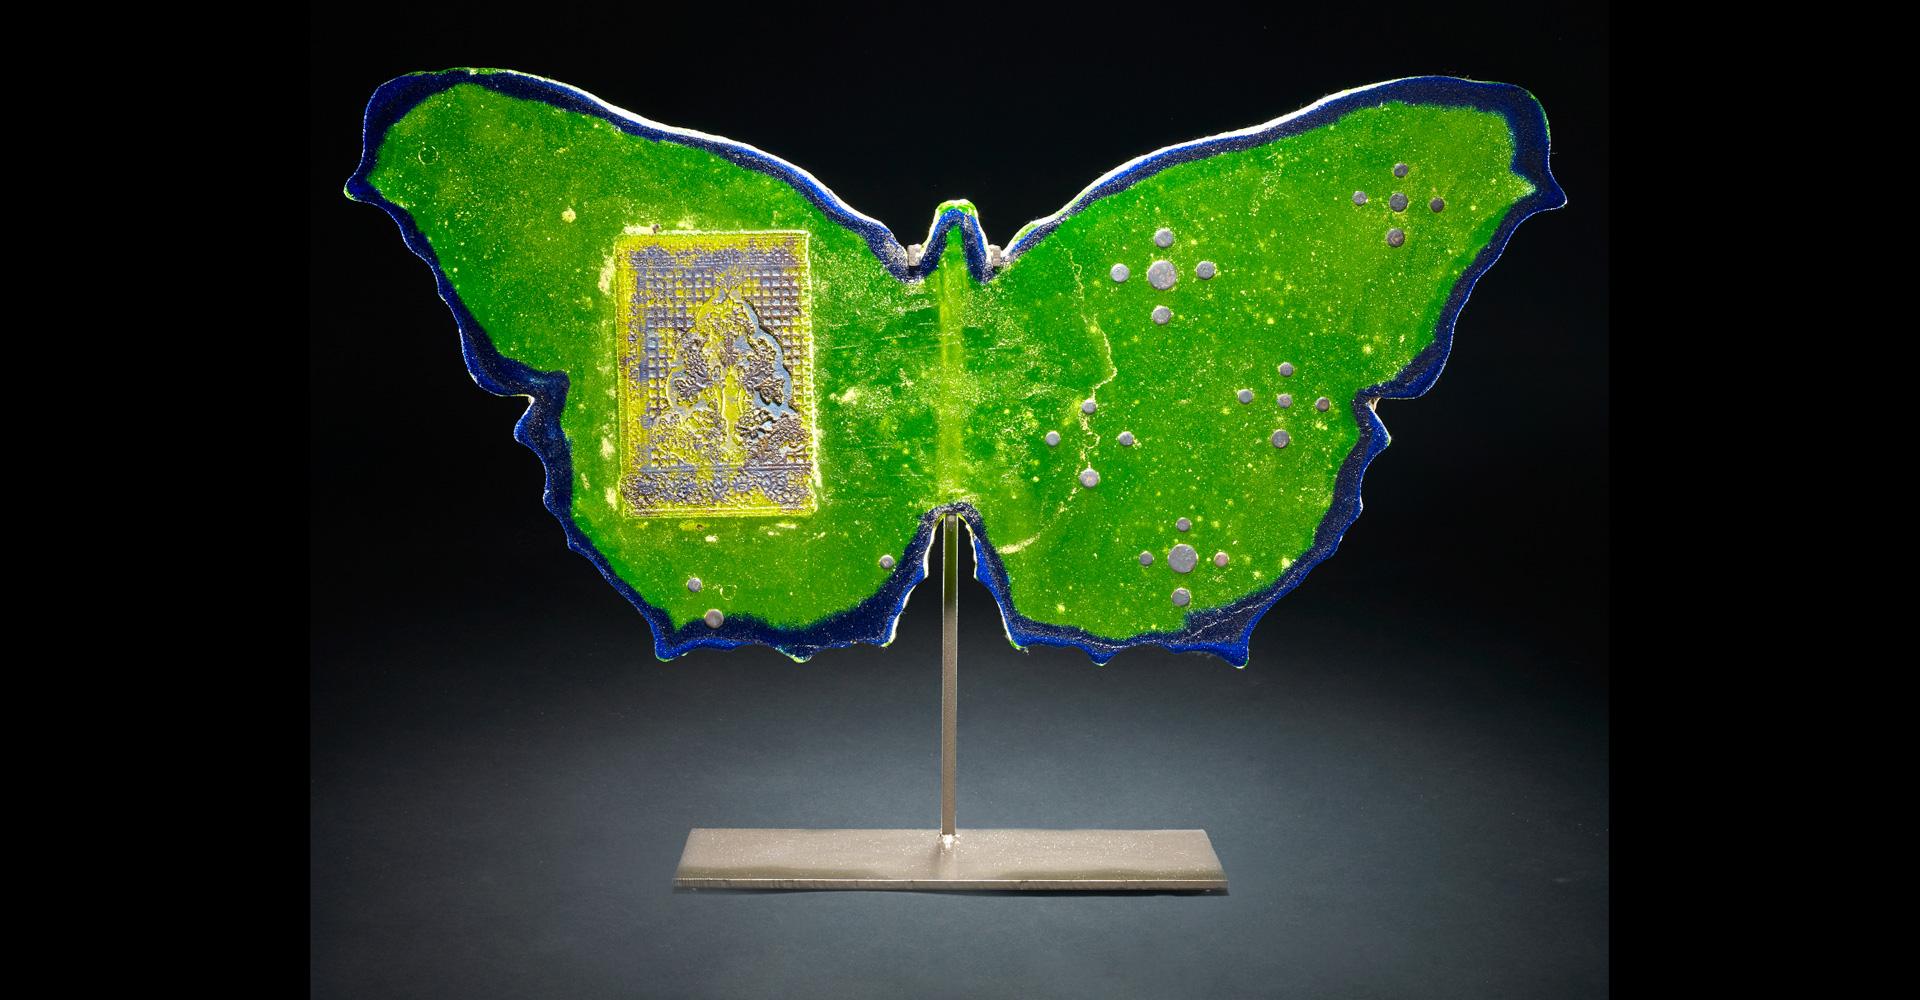 Marlene Rose Figurative Sculpture - "Lime Green Moroccan Butterfly", Pigmented sand-cast glass, hand forged metal